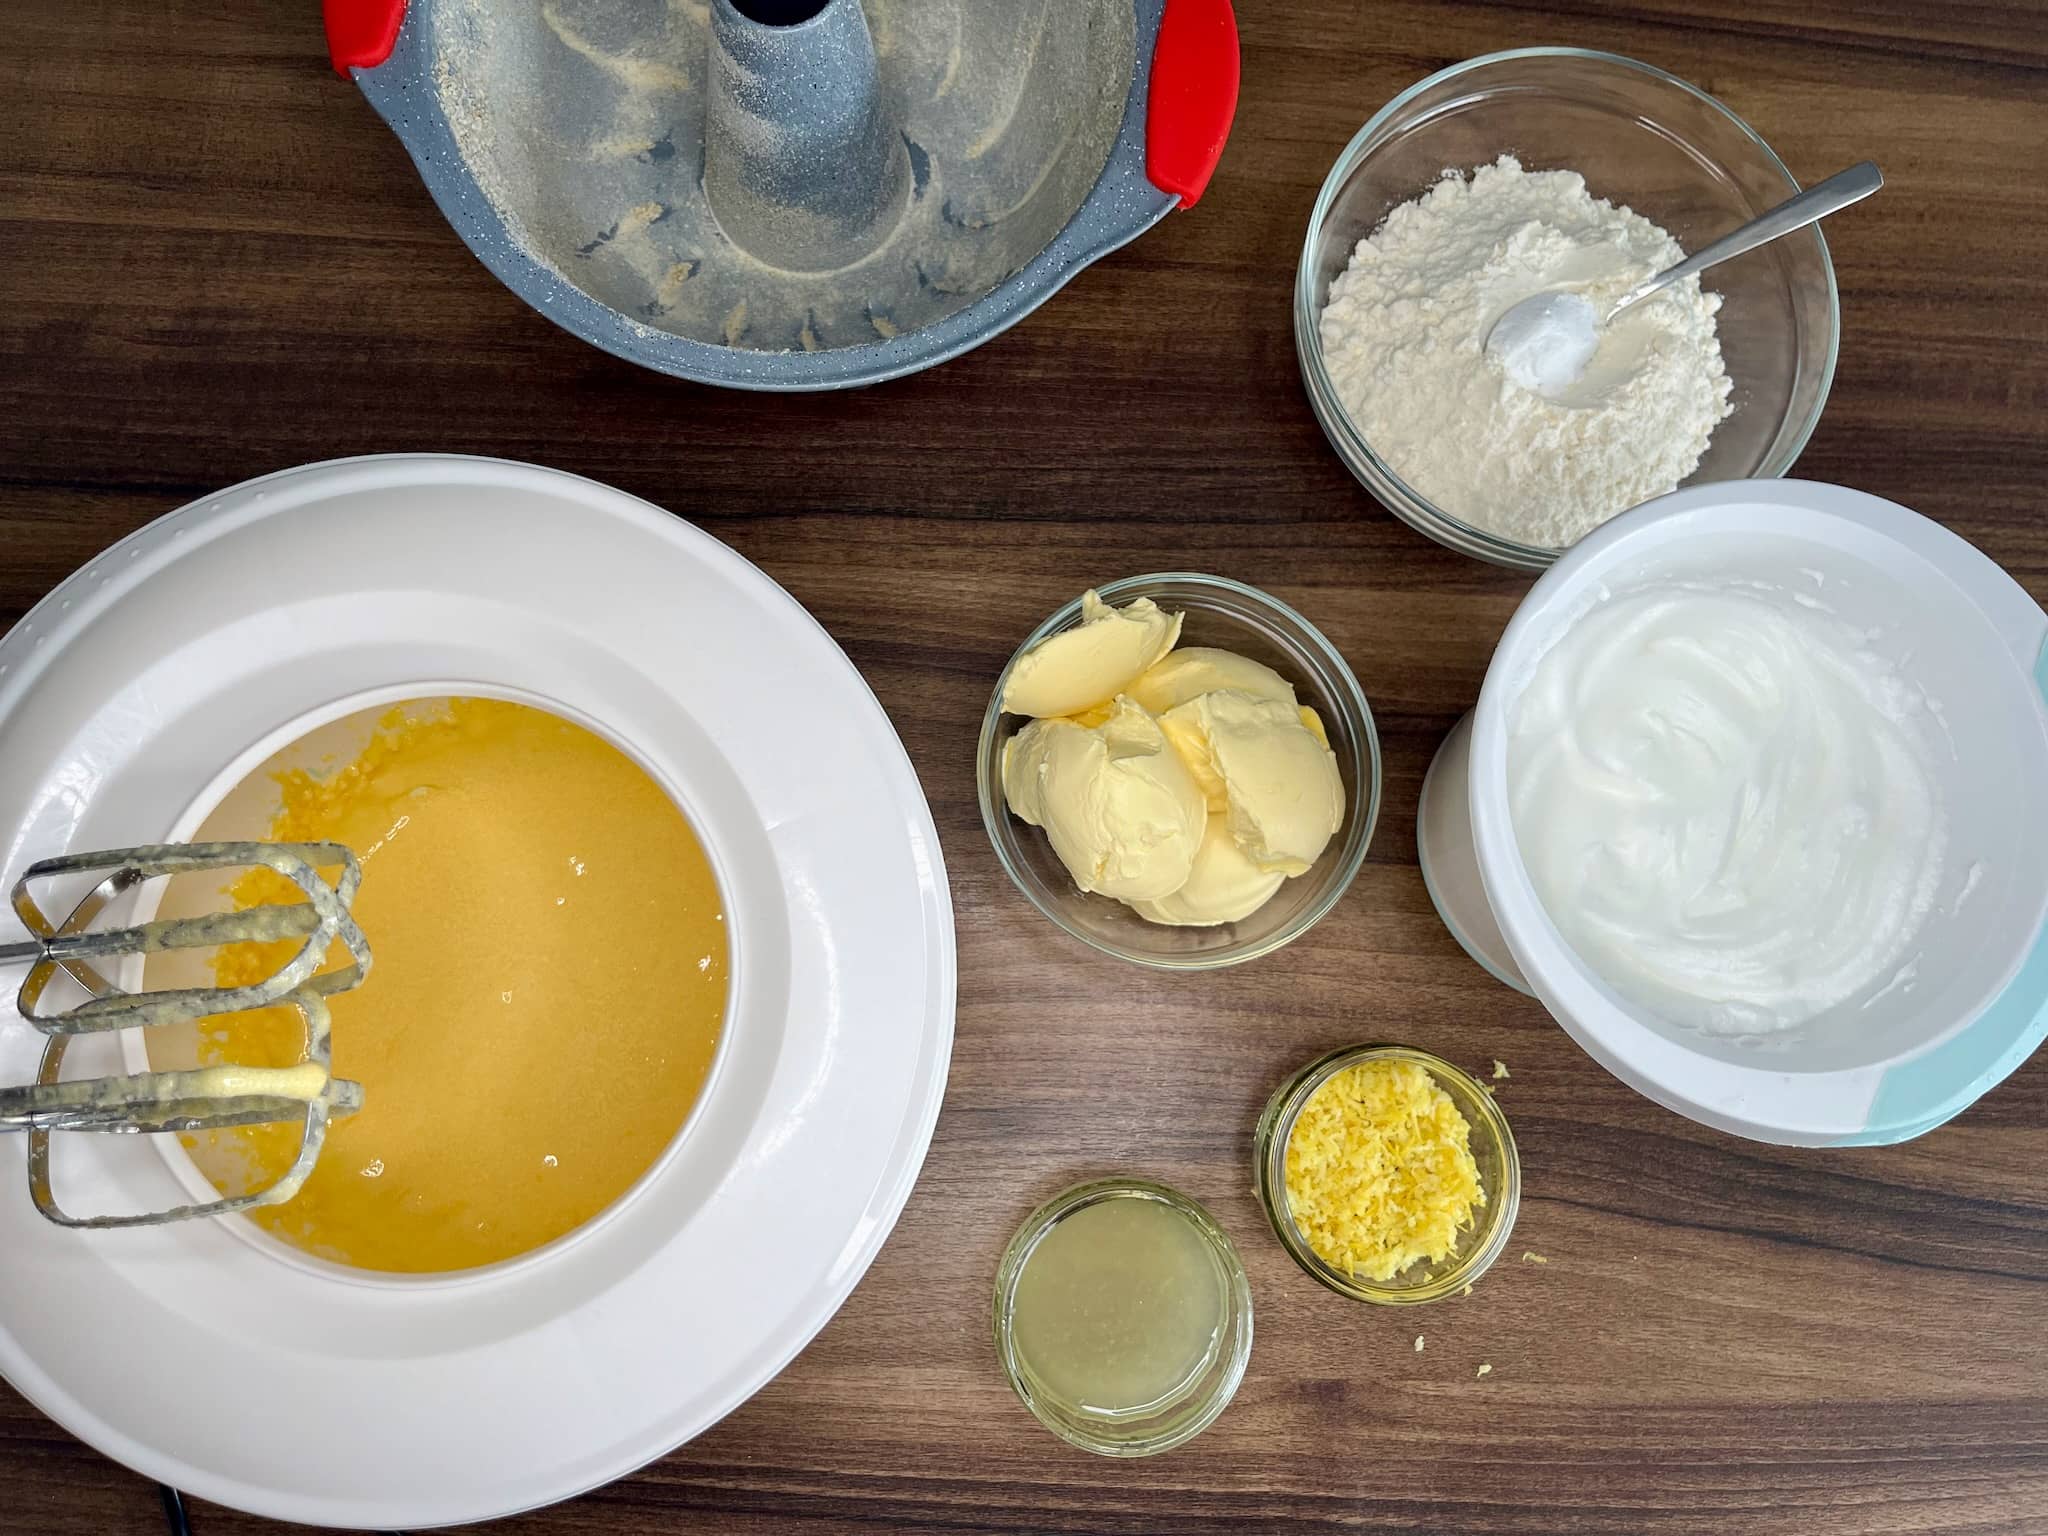 Yolks mixed with sugar and other ingredients ready to use on the tabletop